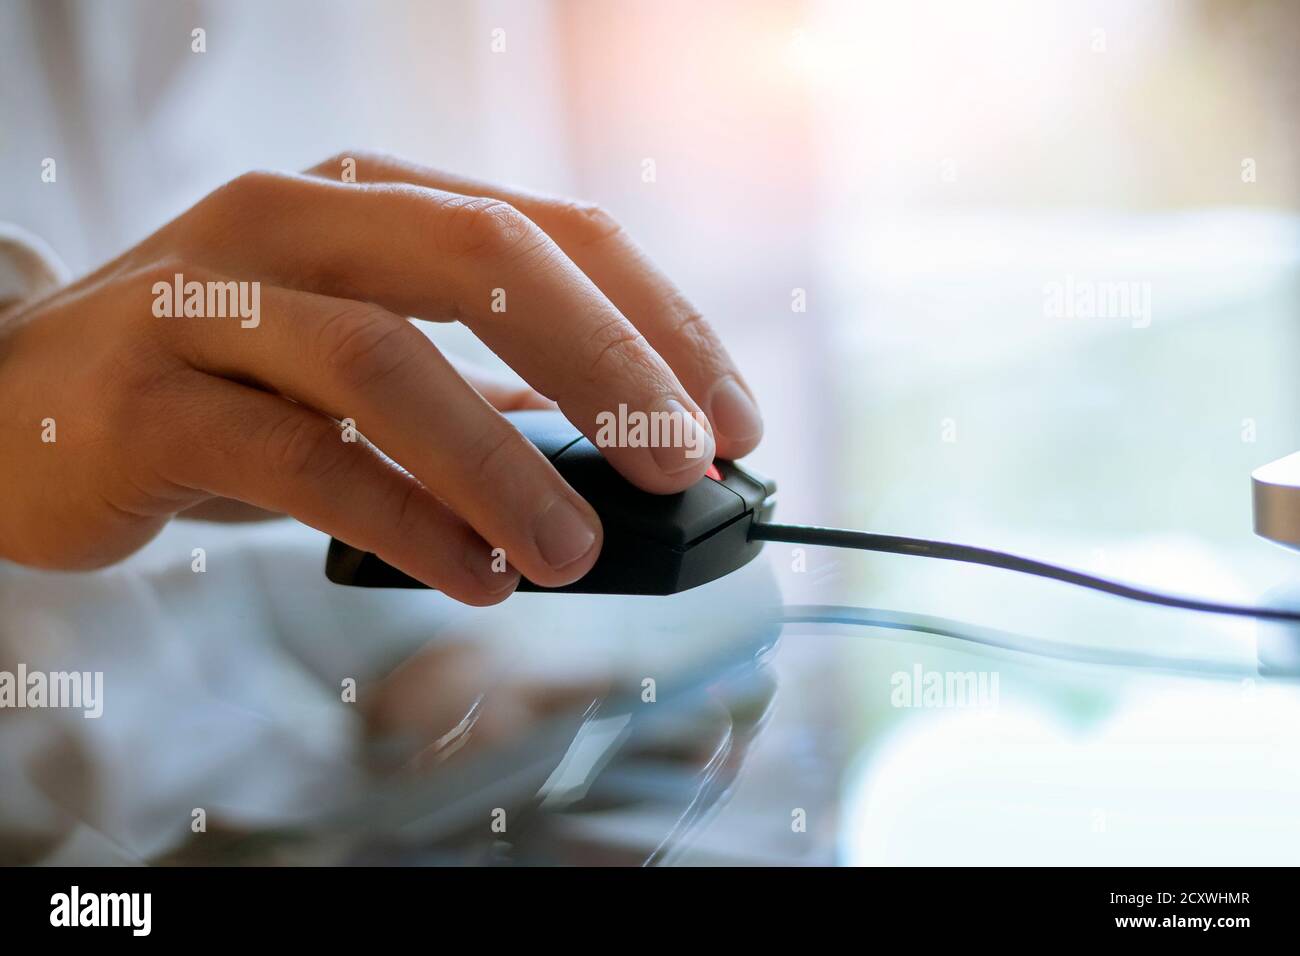 Close-up of laptop mouse and hand Stock Photo